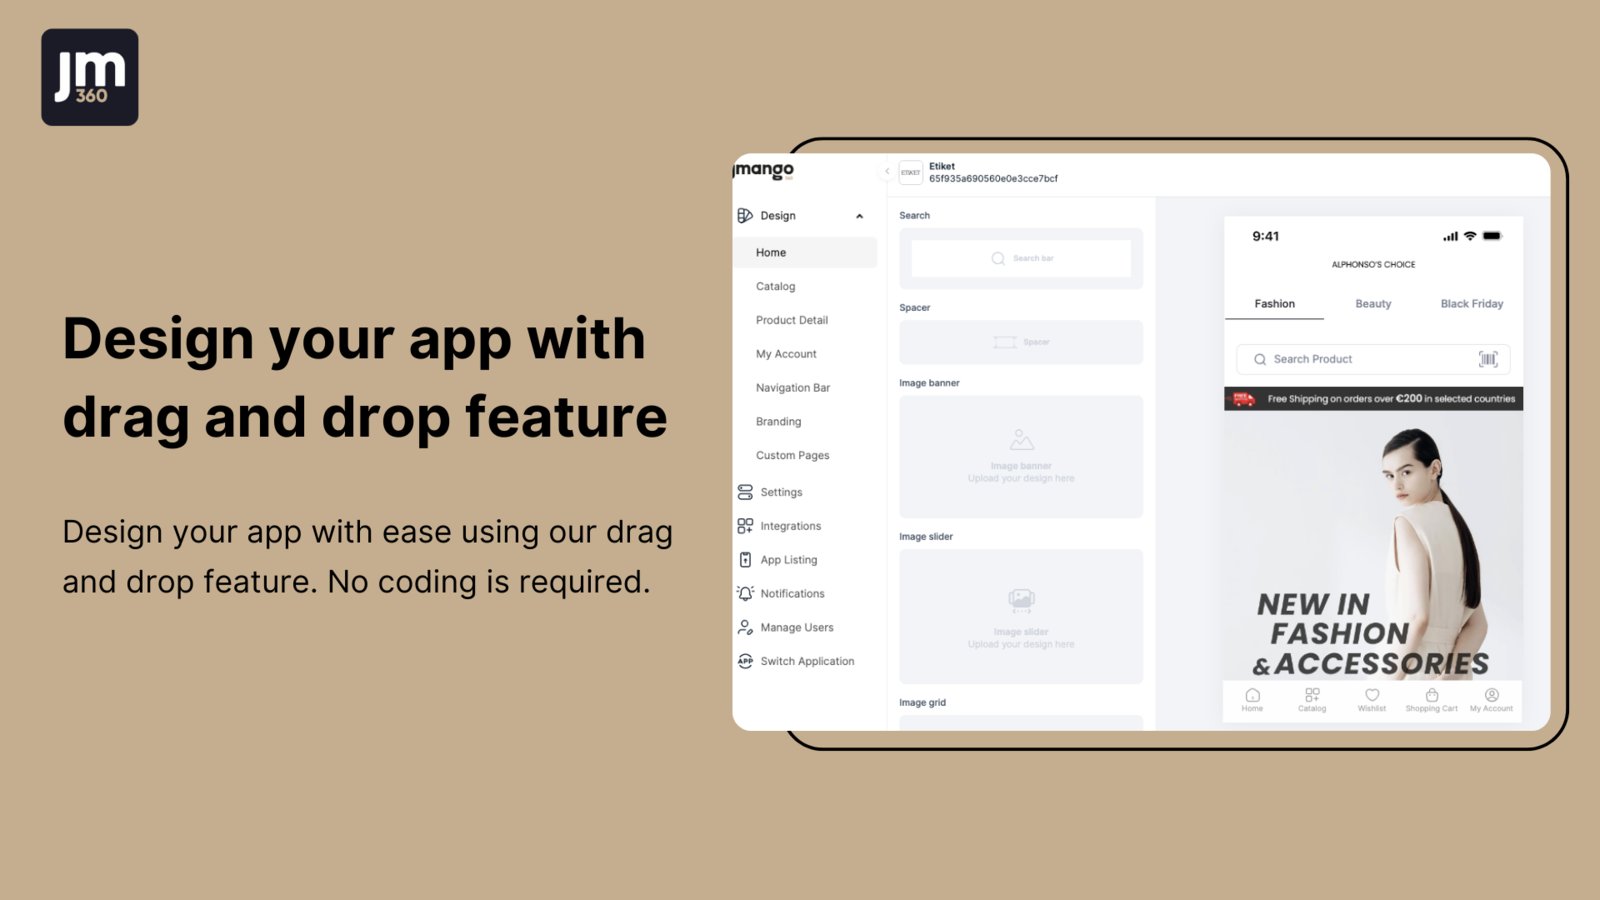 Design your app with drag and drop feature